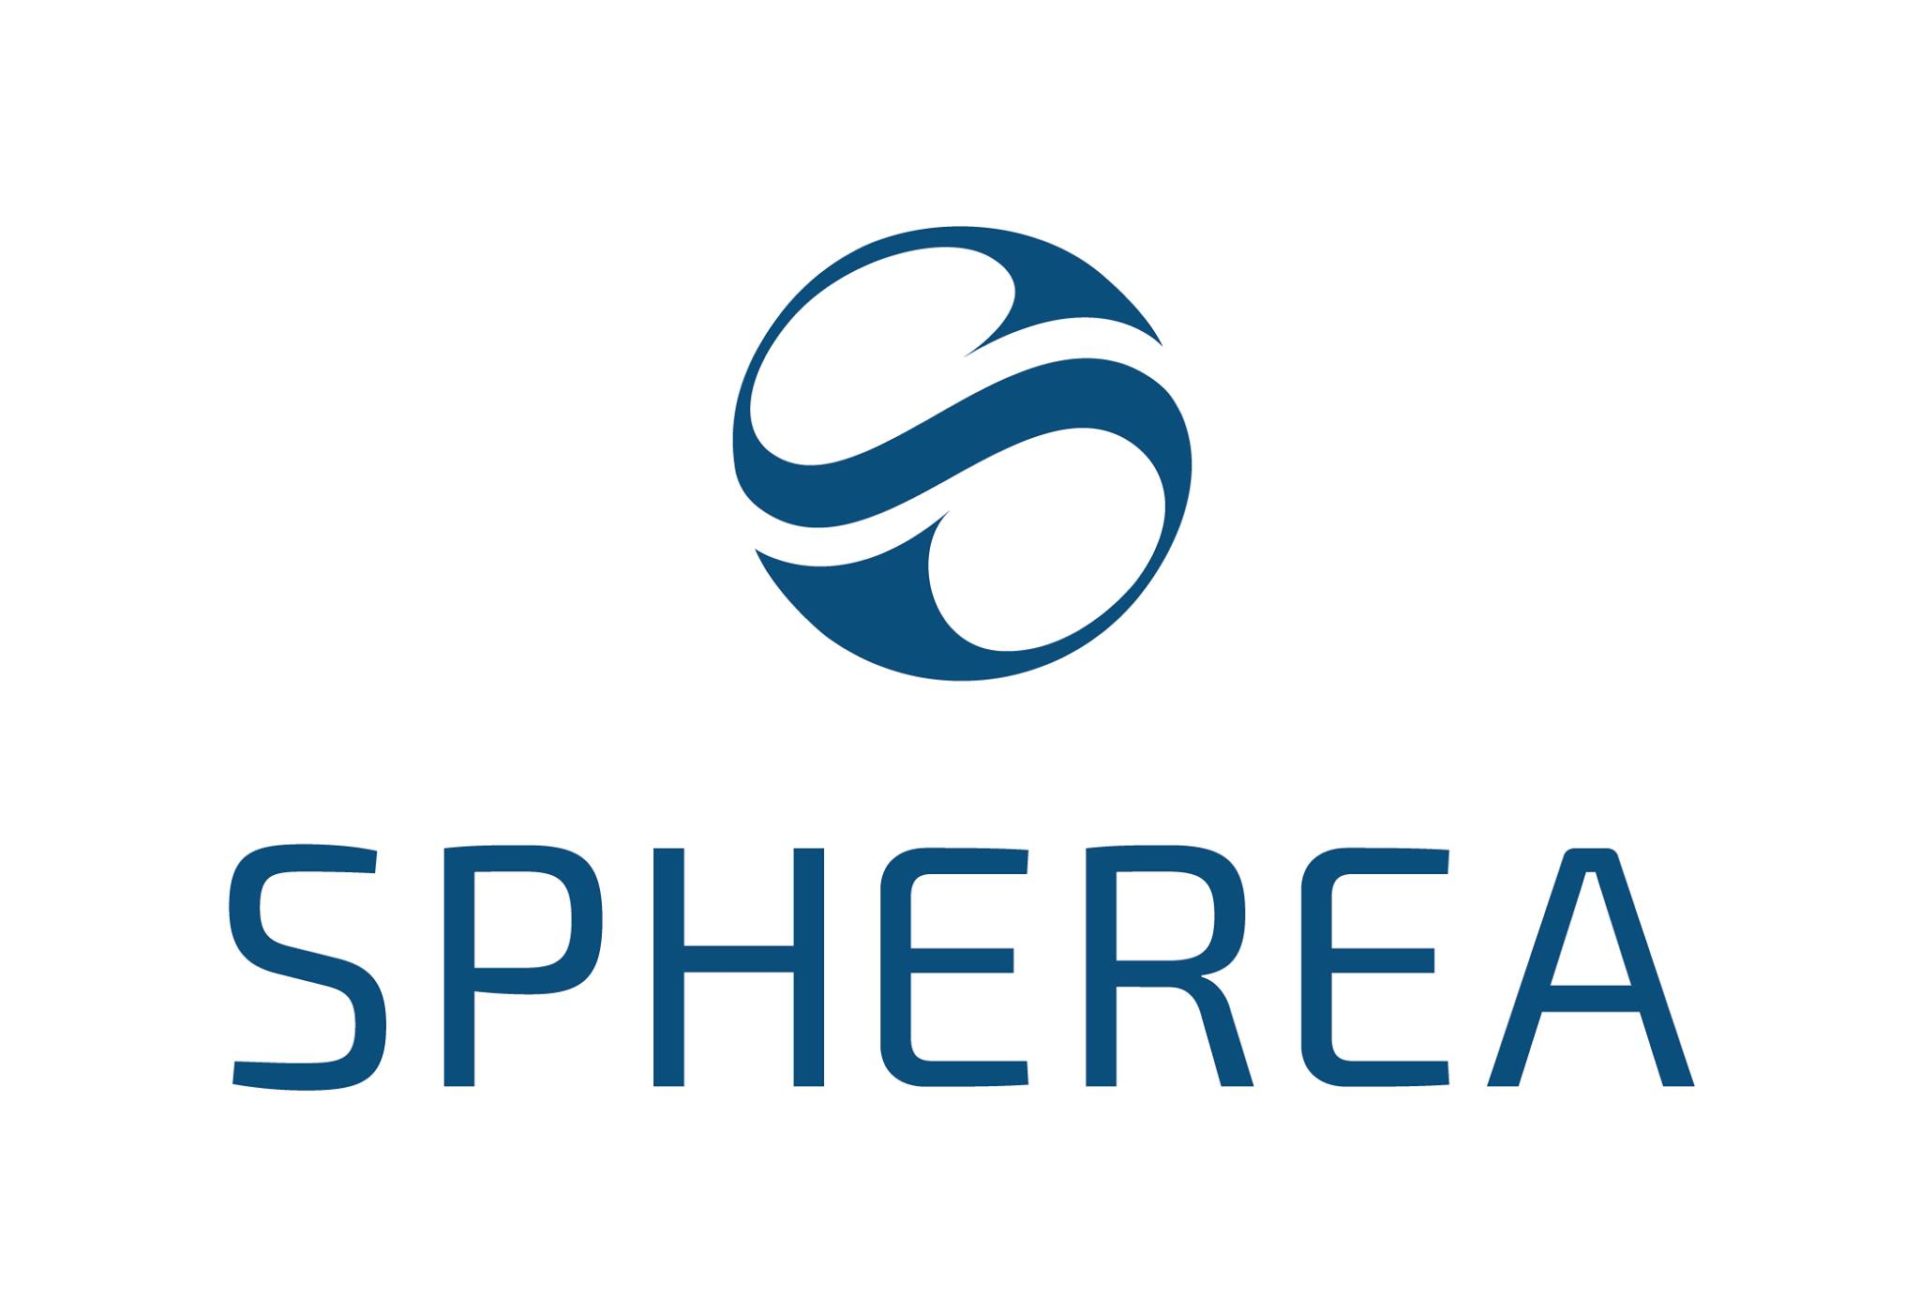 Spherea Test & Services Limited